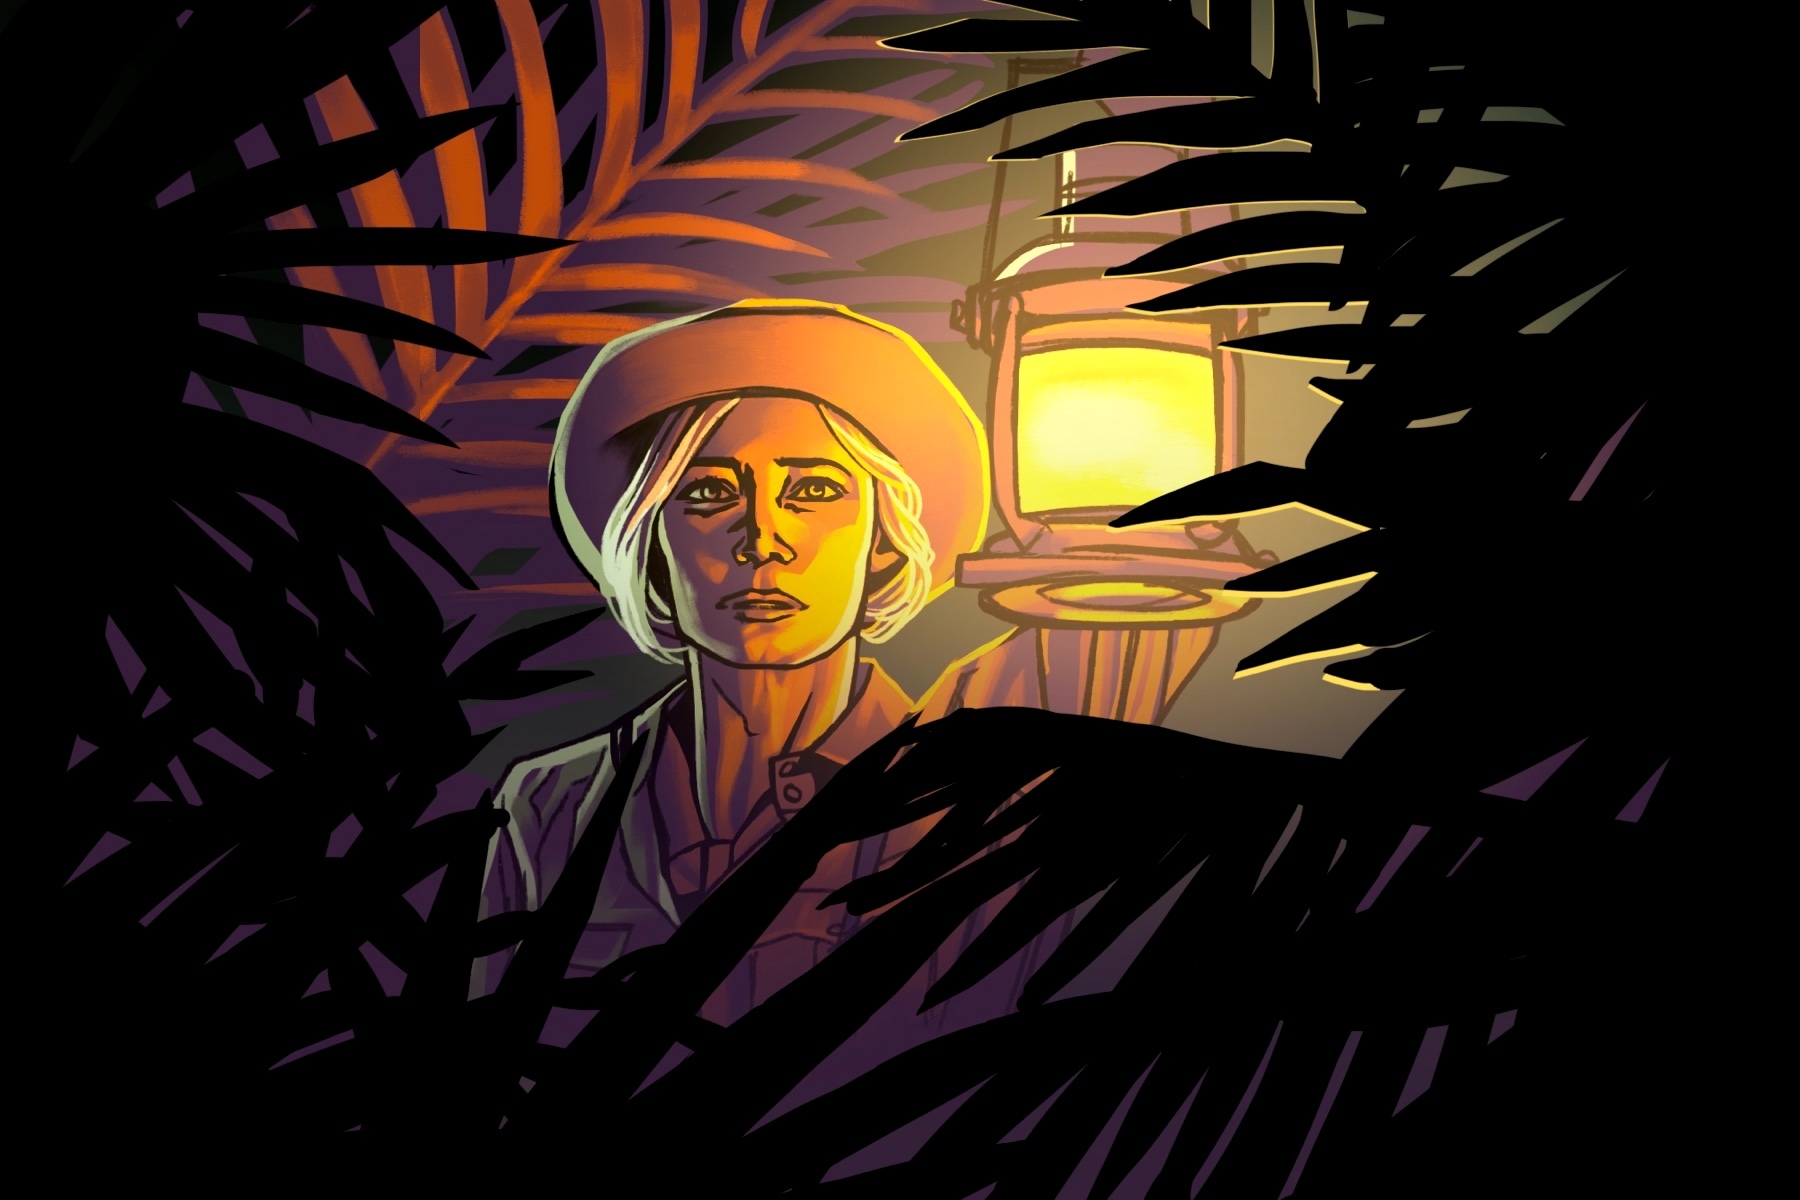 An illustration depicts the main character of Jungle Cruise, played by Emily Blunt, holding a lantern in the midst of dense jungle foliage.